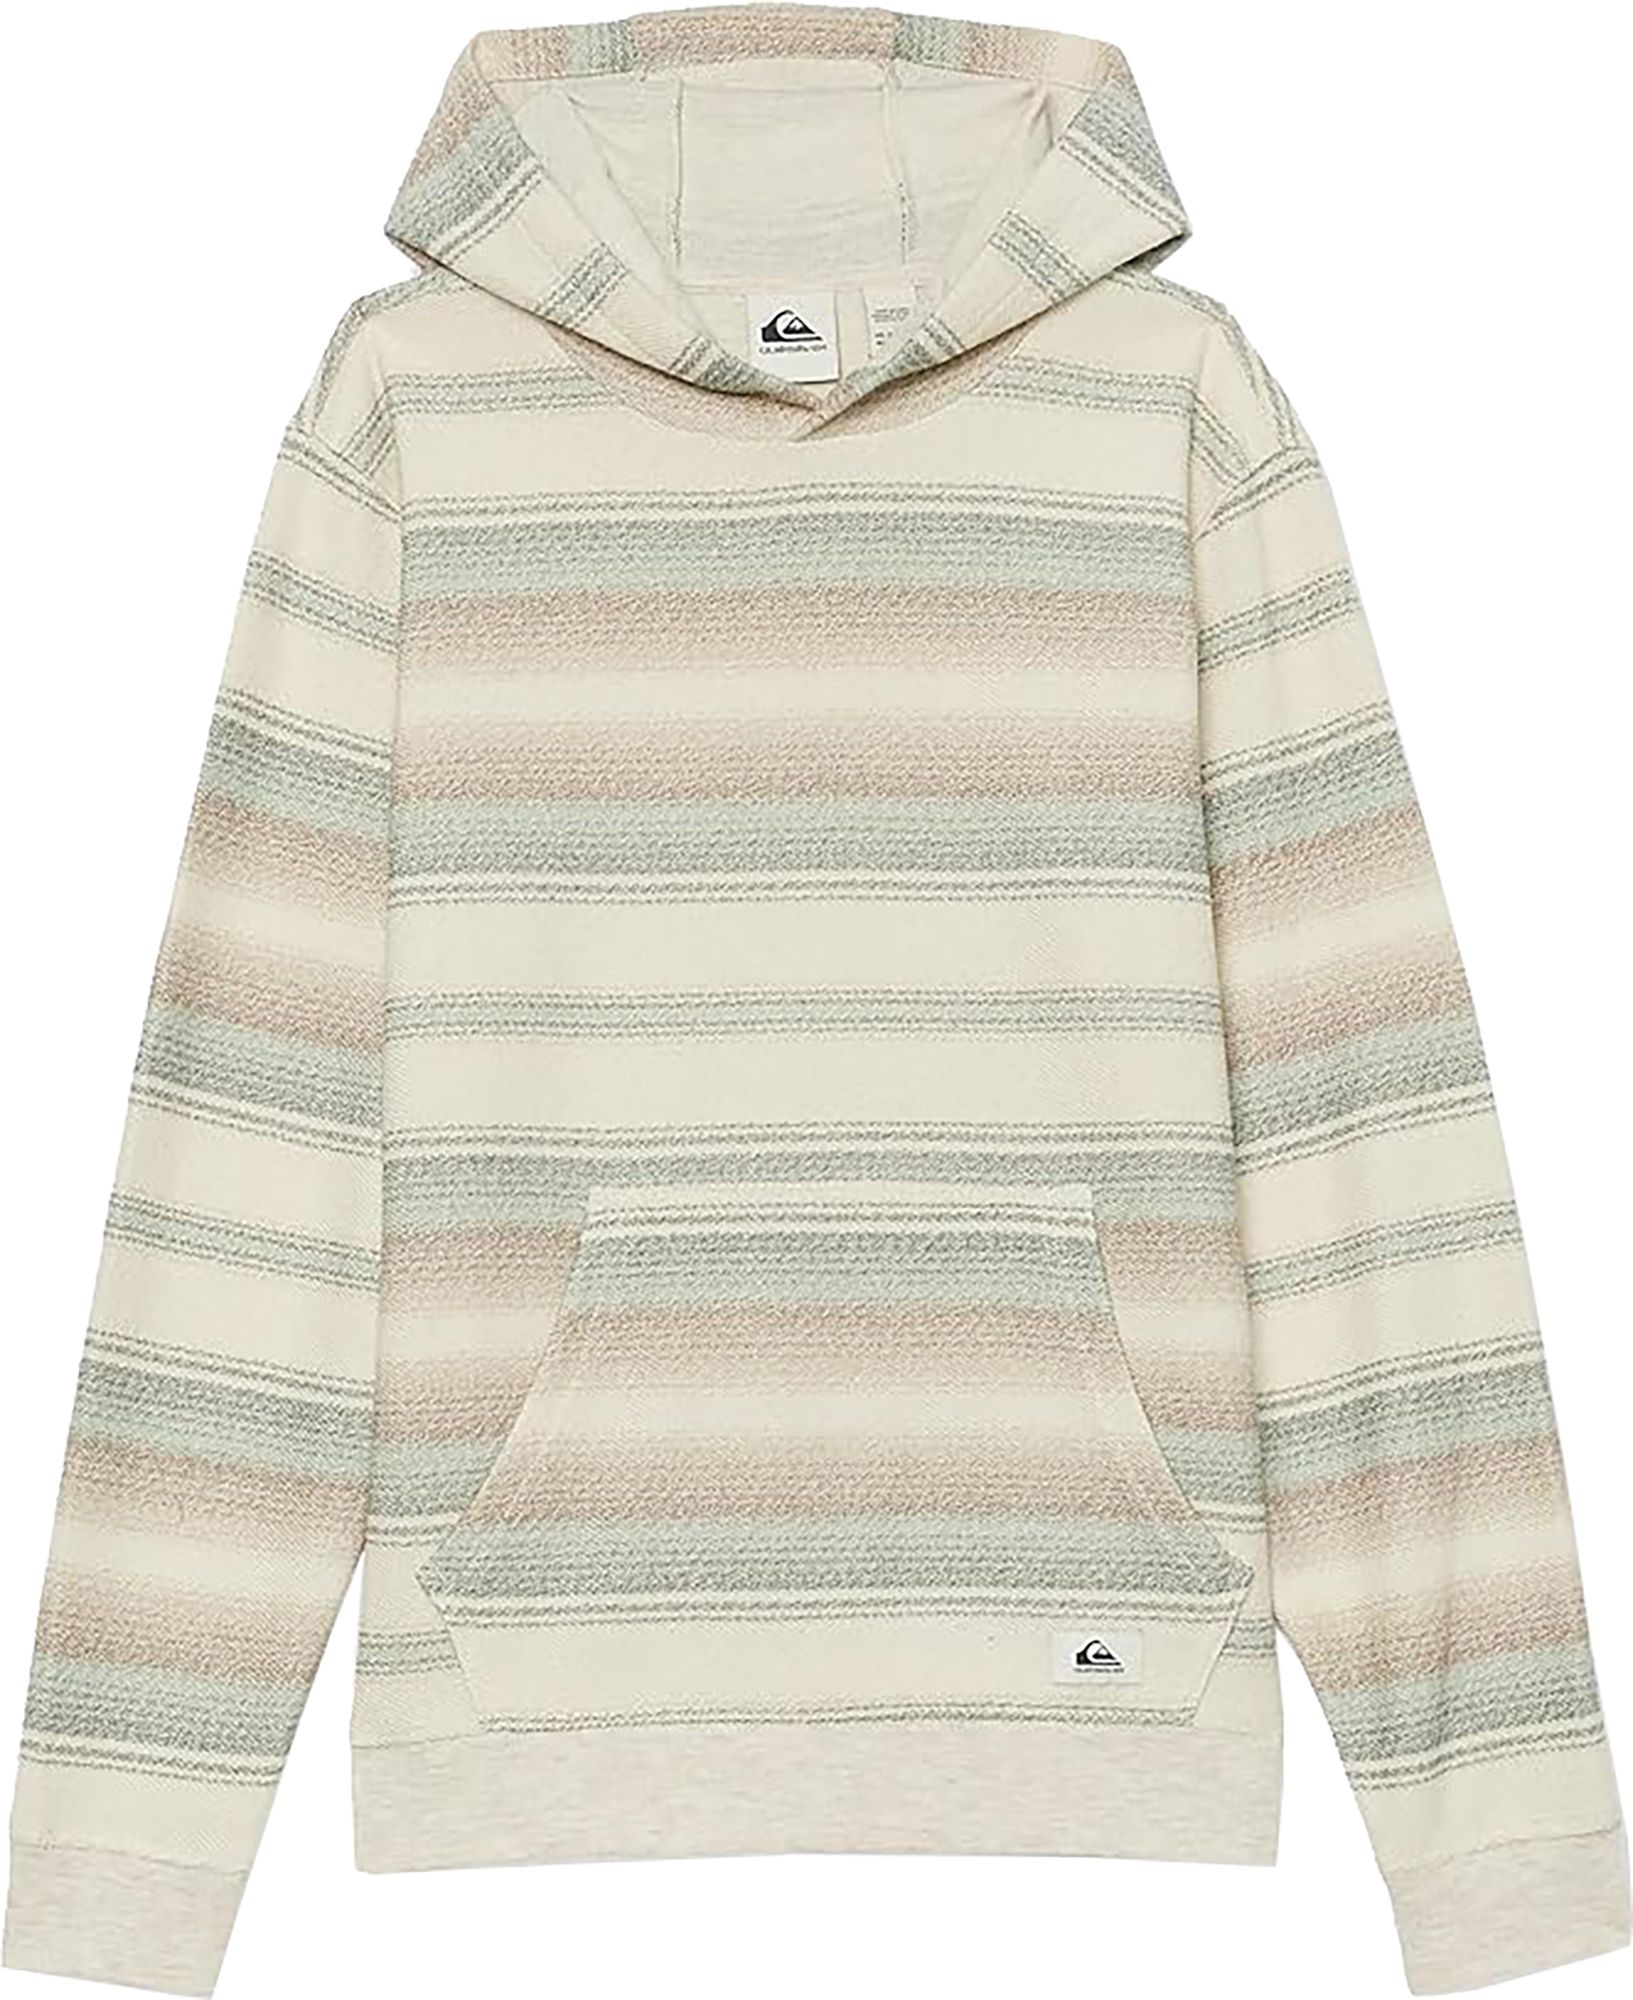 Quiksilver Youth Great On The Way Hoodie